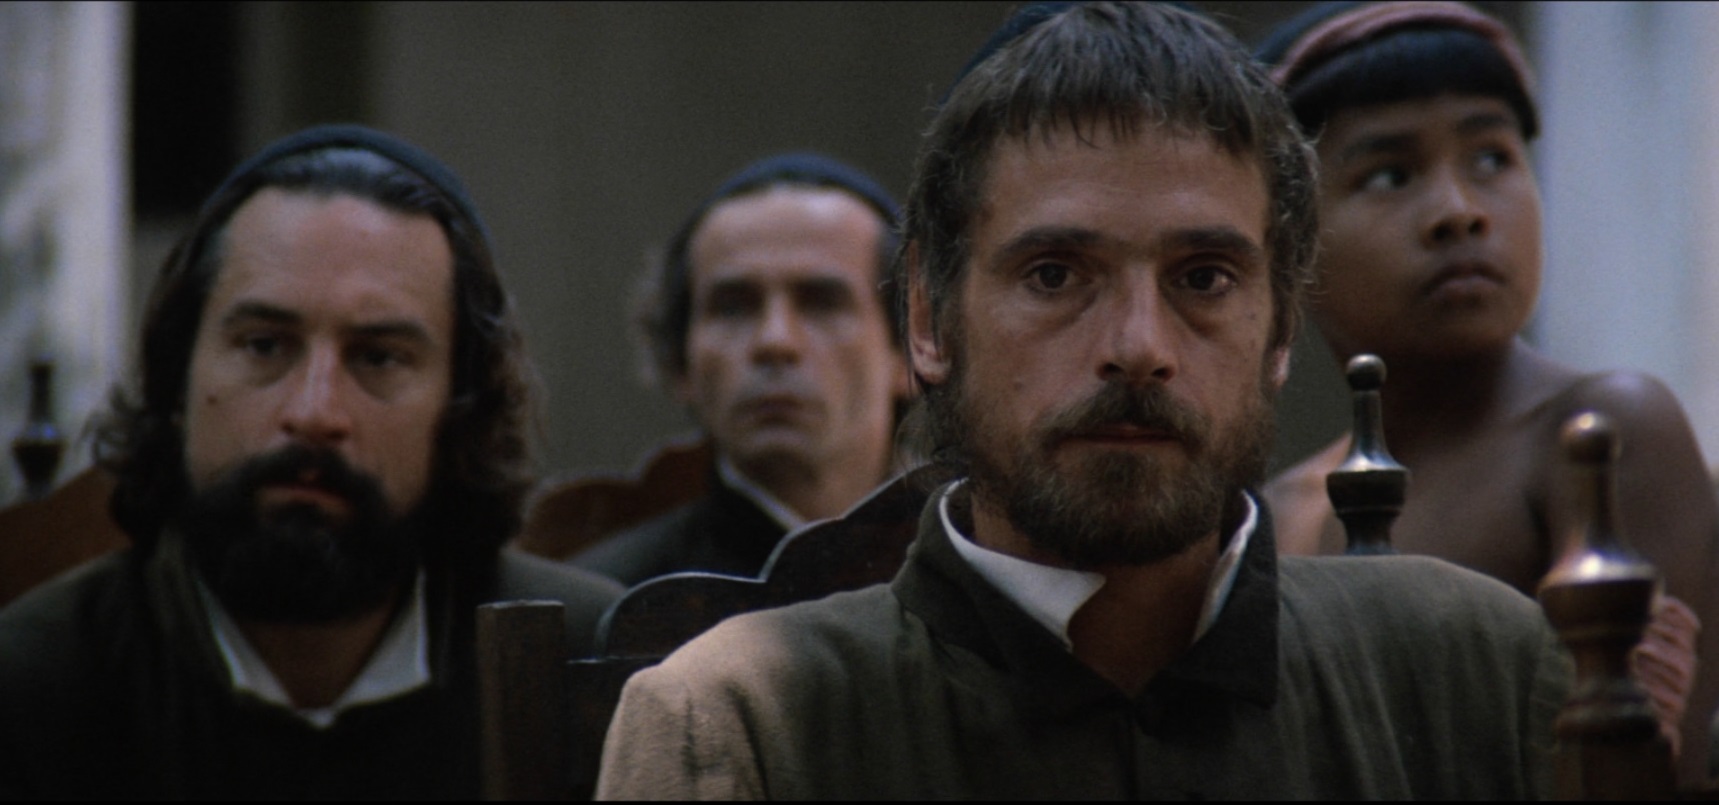 Jeremy Irons and Robert de Niro in The Mission